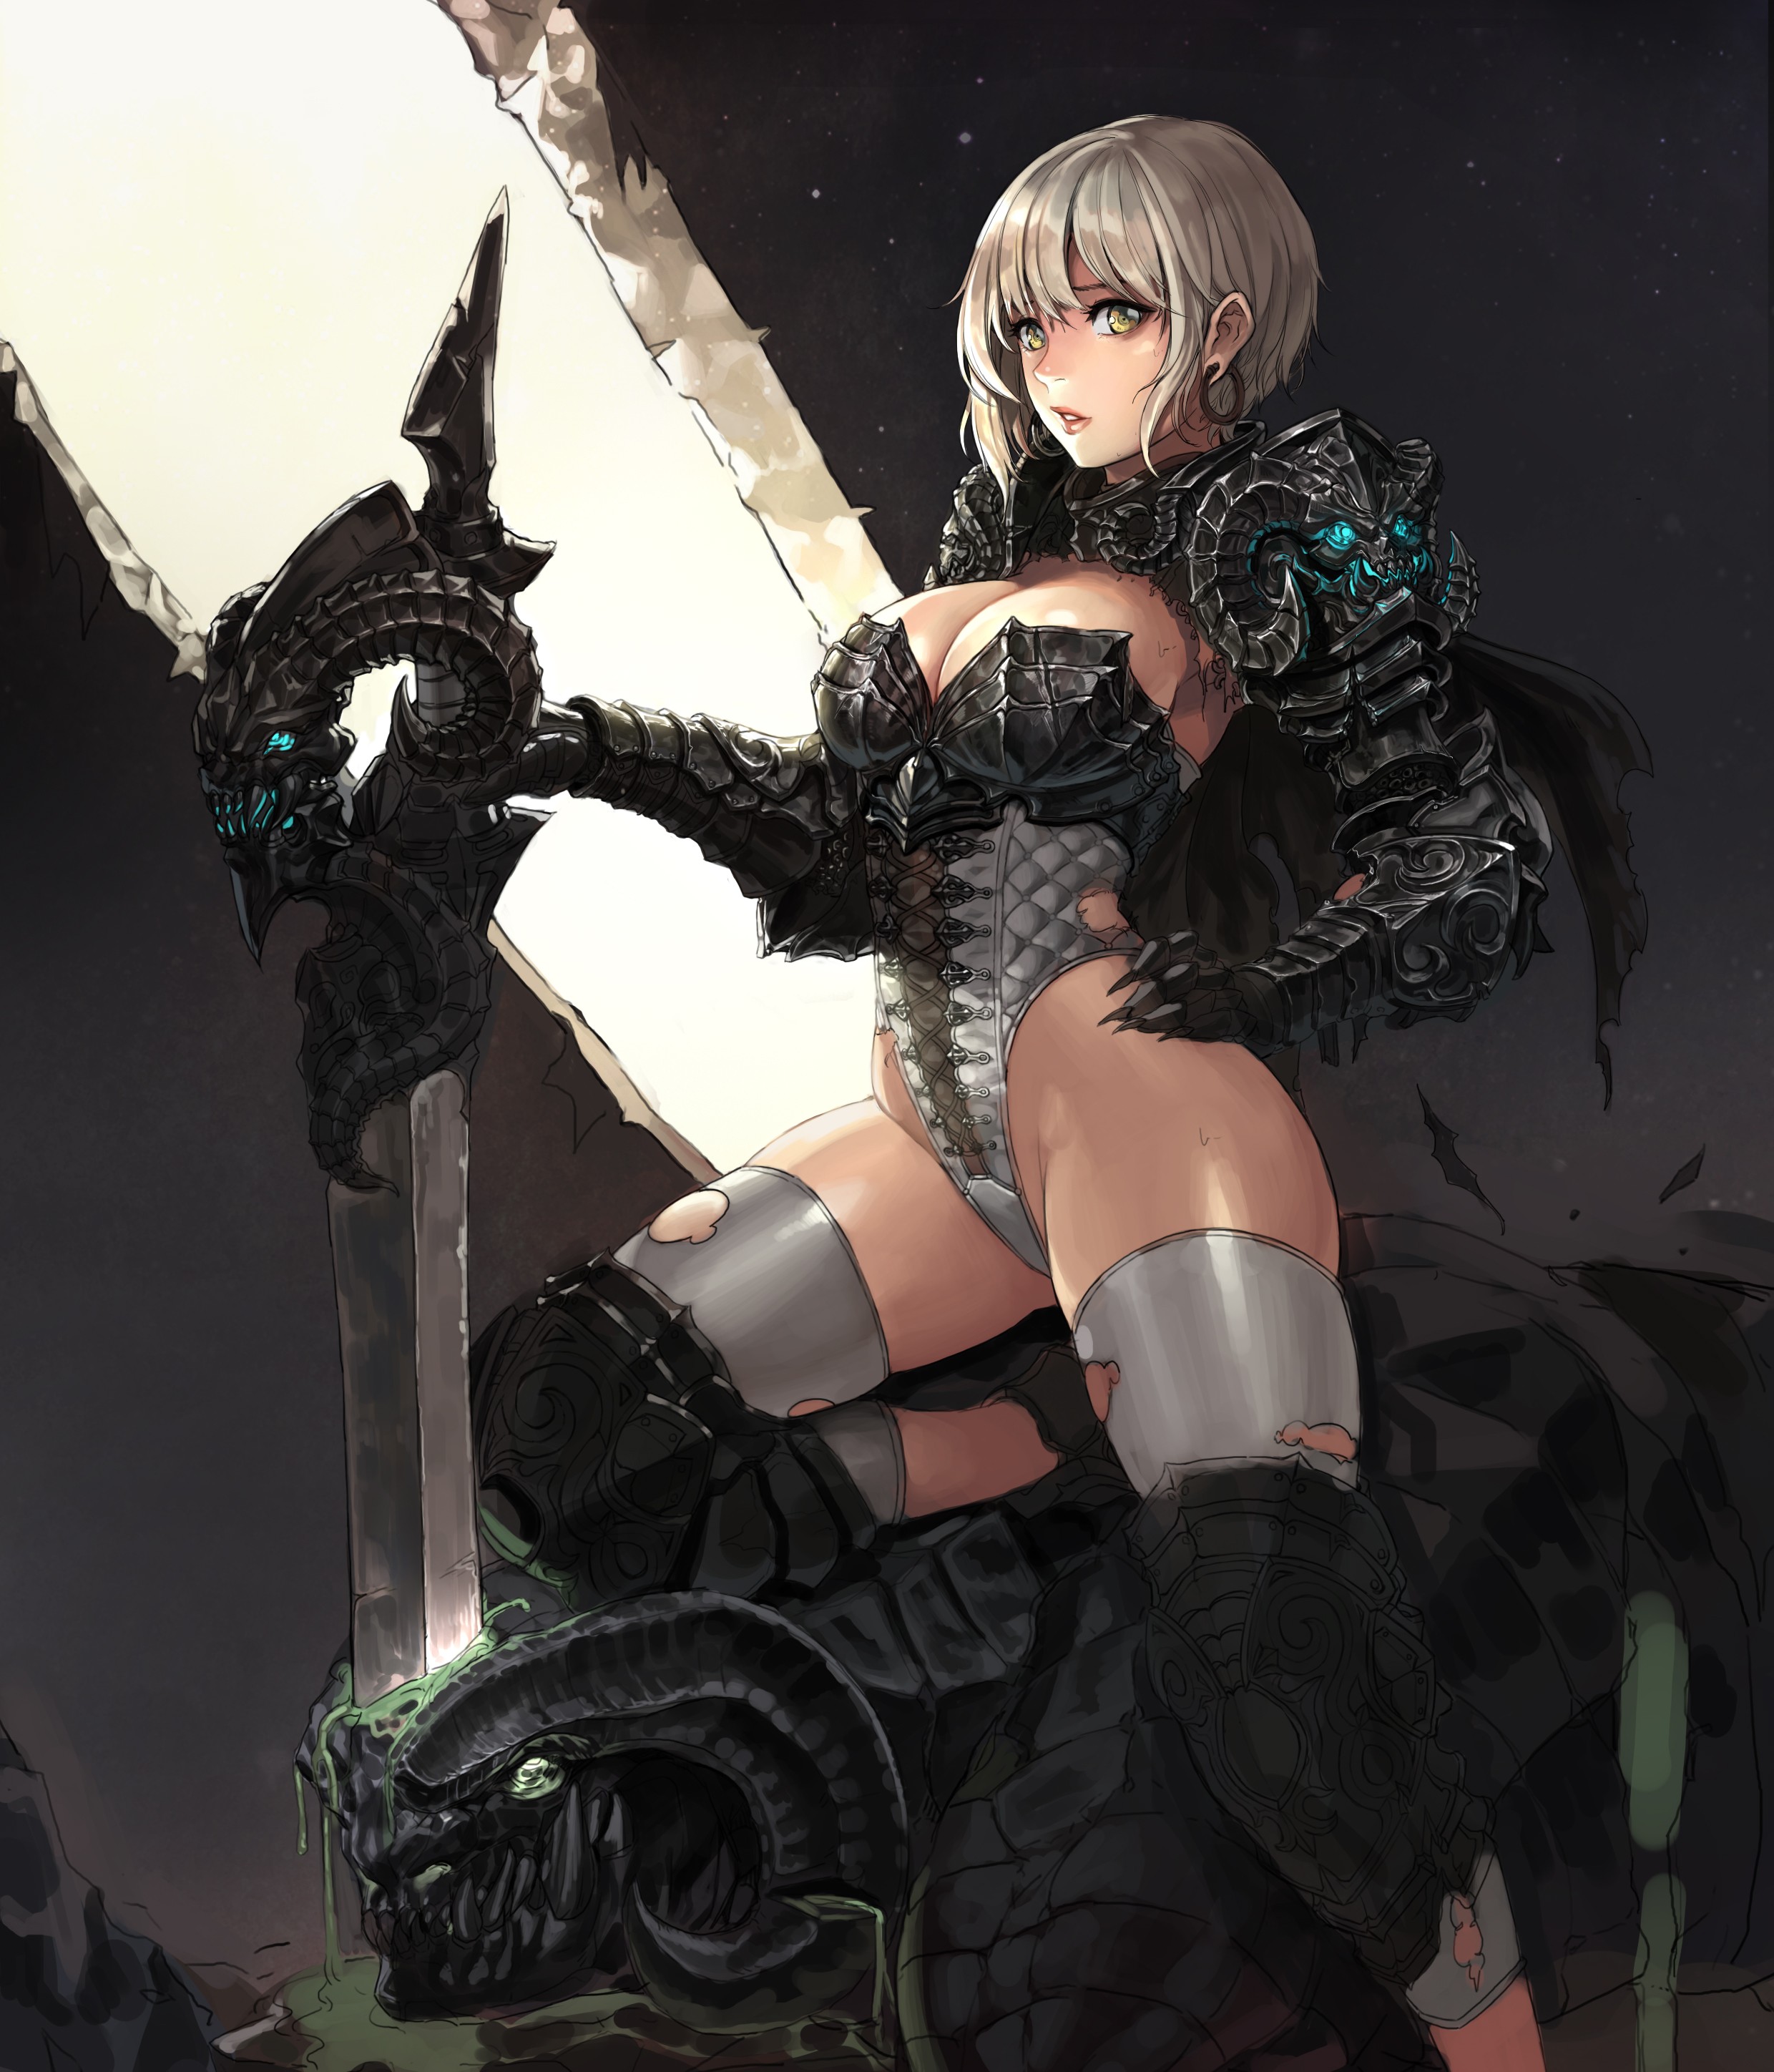 Anime 2480x2896 anime girls simple background torn clothes legs armor short hair sword weapon original characters Daeho Cha fantasy art fantasy girl fantasy armor creature women with swords torn stockings stockings boobs big boobs bodysuit